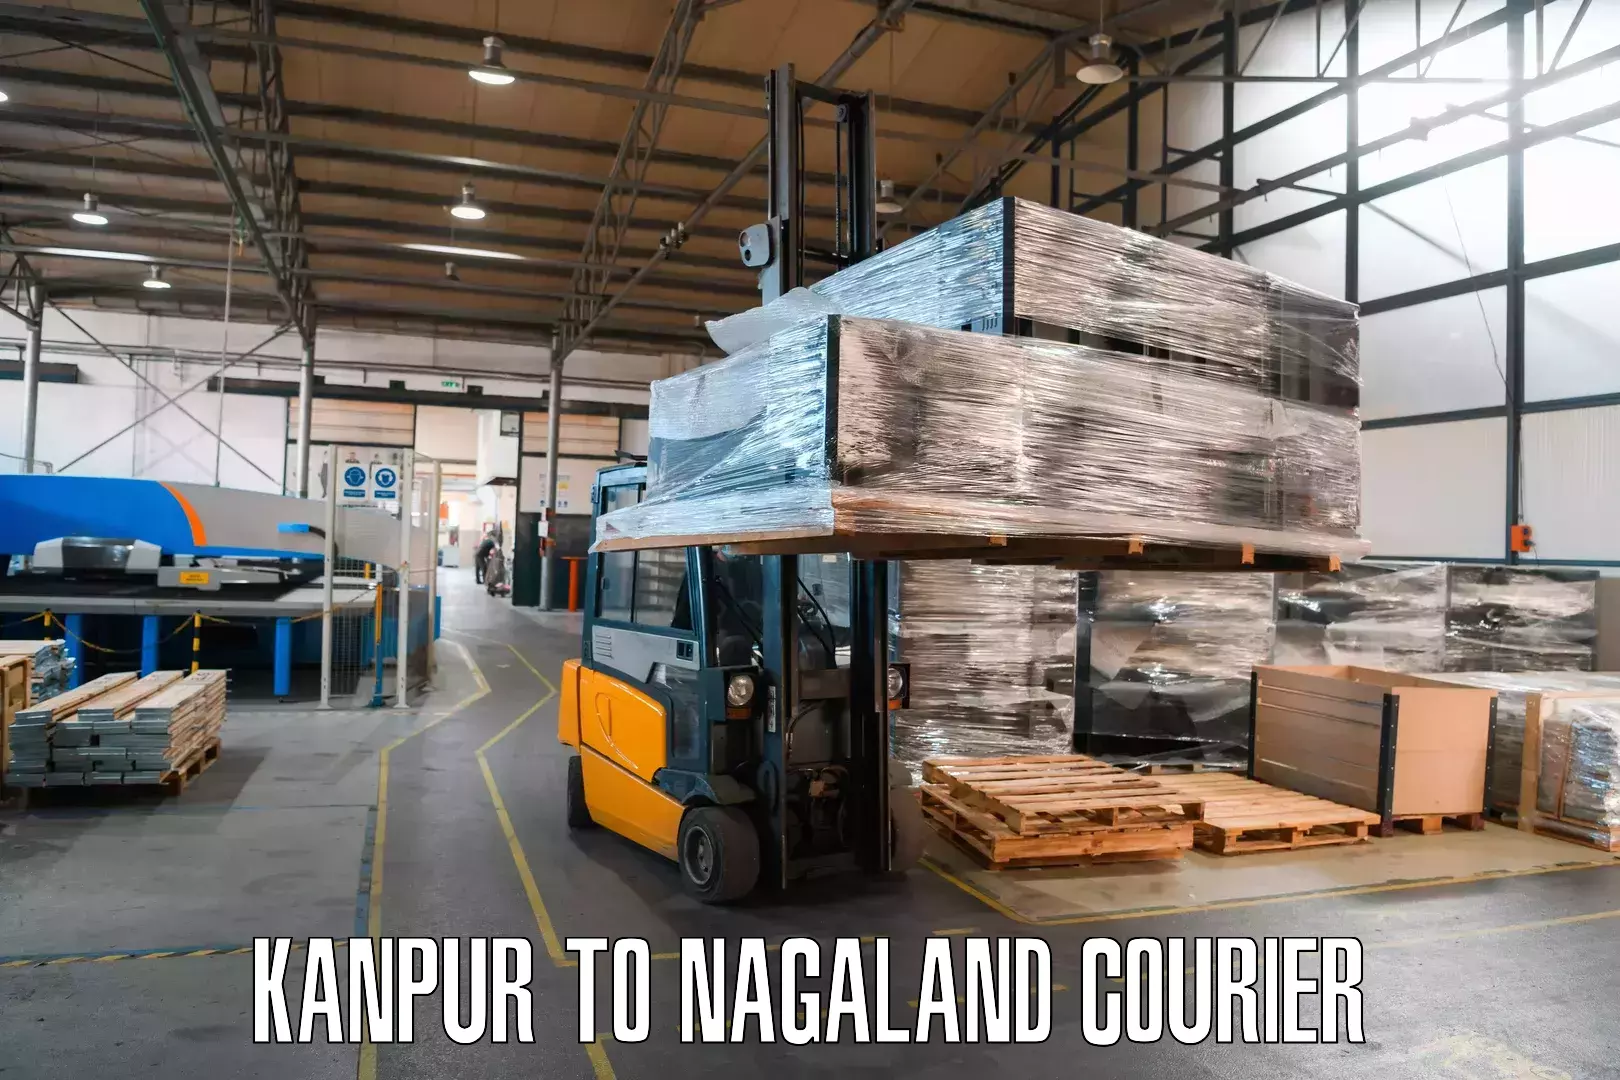 Express delivery capabilities in Kanpur to Nagaland